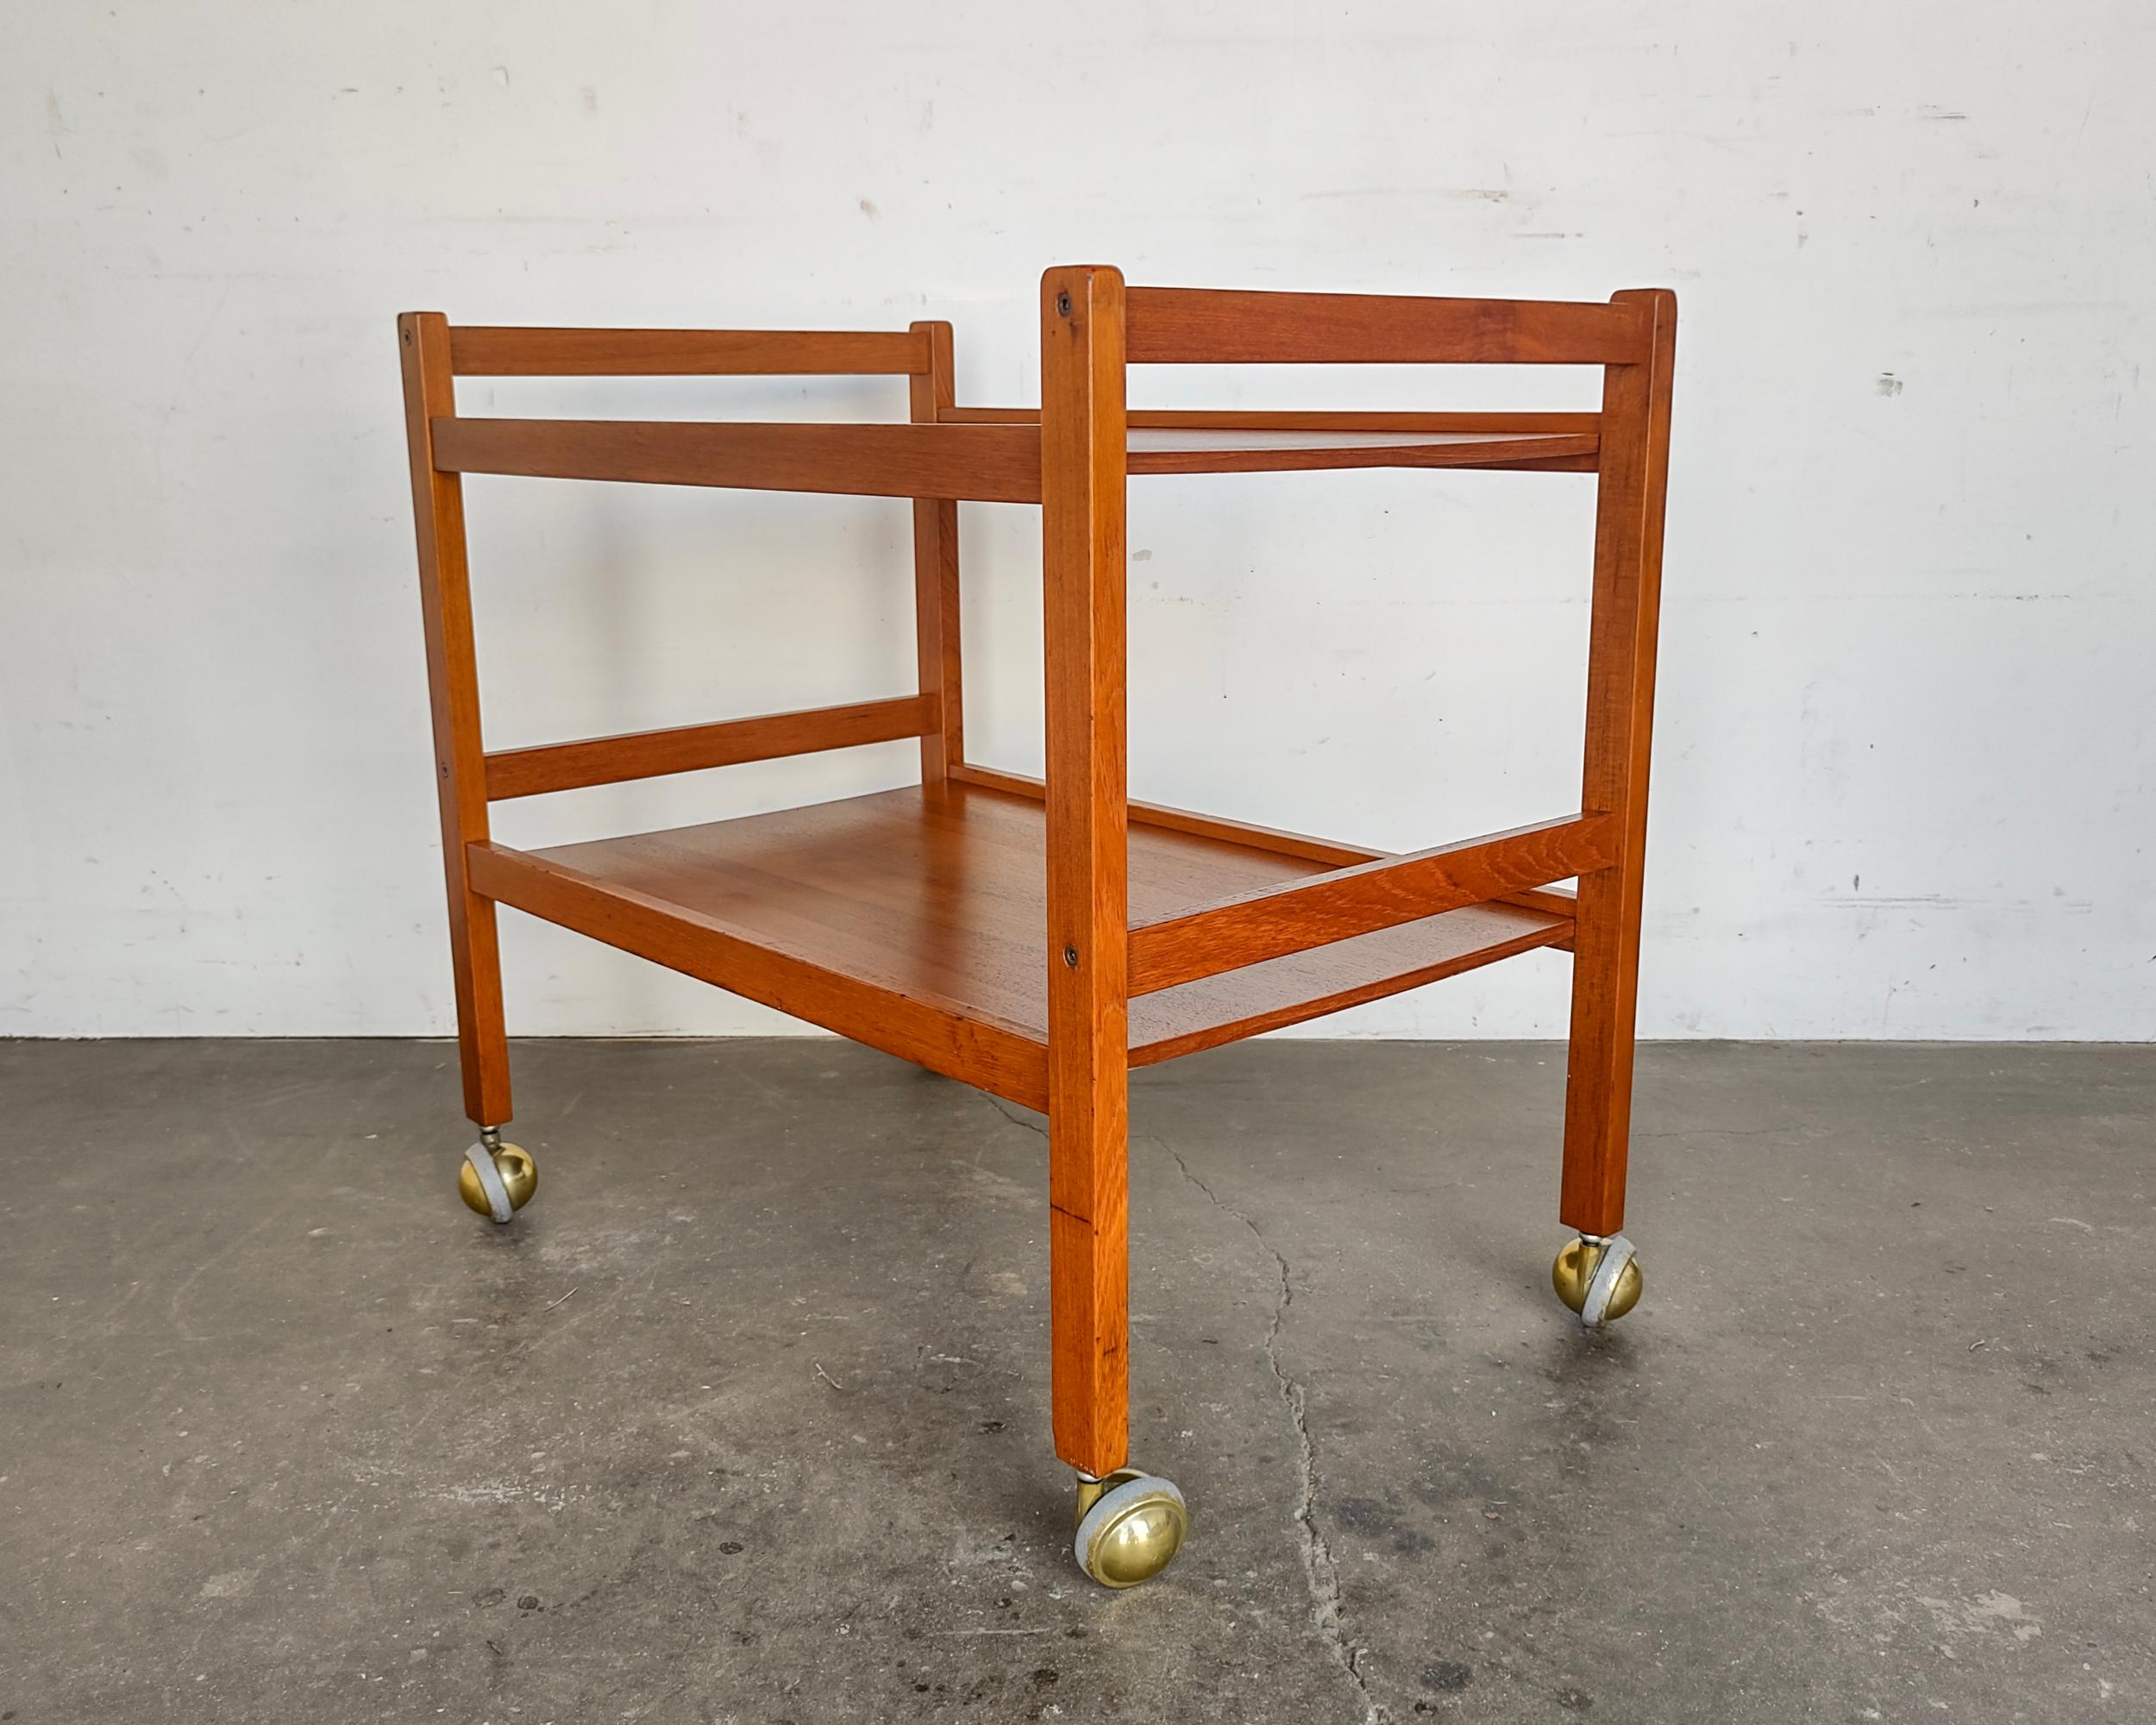 Danish Mid-Century Modern teak wood bar cart by Brbr. Furbo. Features contrasting brass Shepard casters. Overall great vintage condition, a couple scratches, wear consistent with age.

28